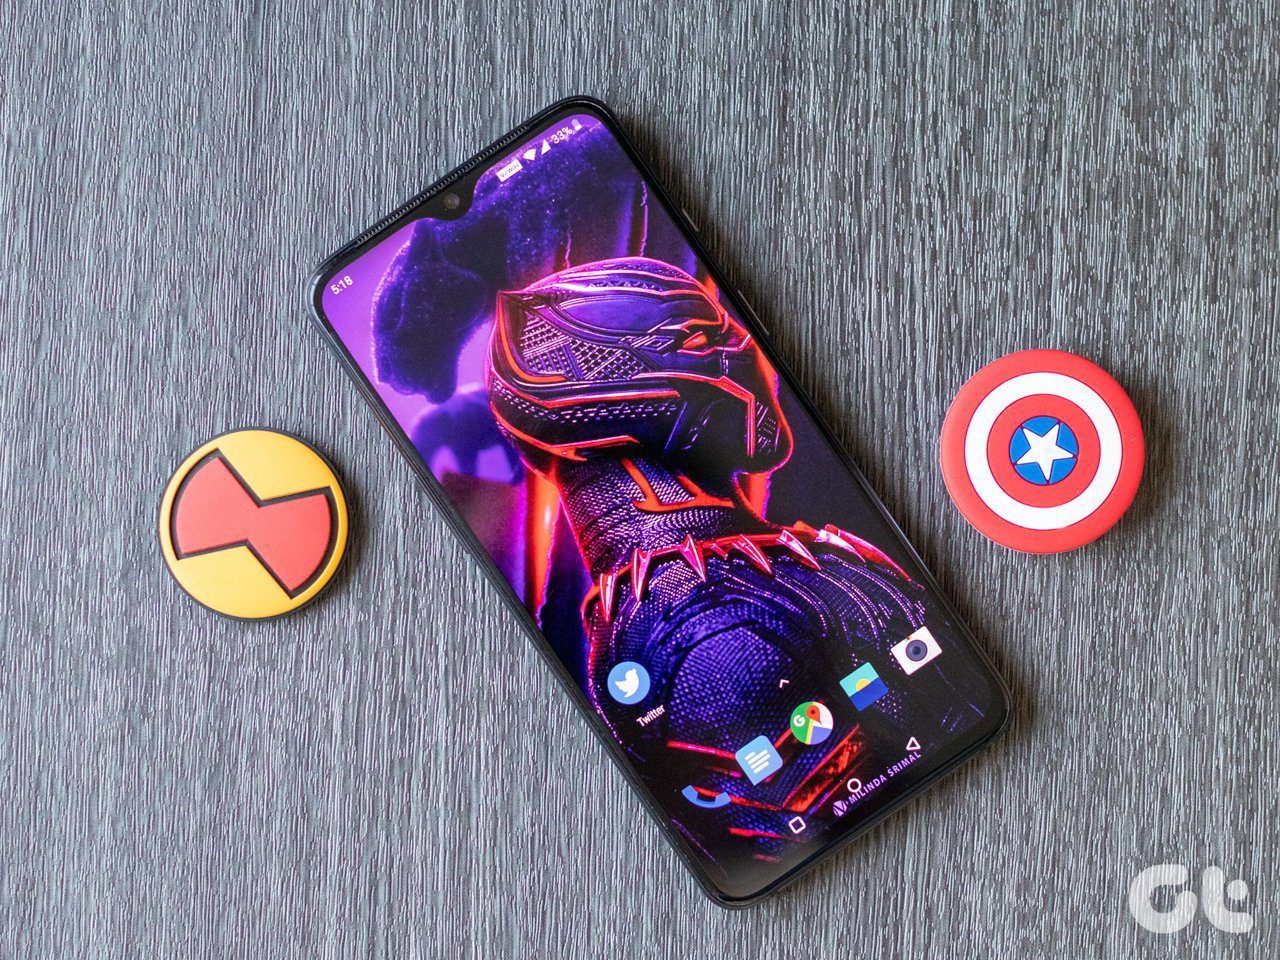 Best Wallpaper Android Apps in 2020 dopewalls